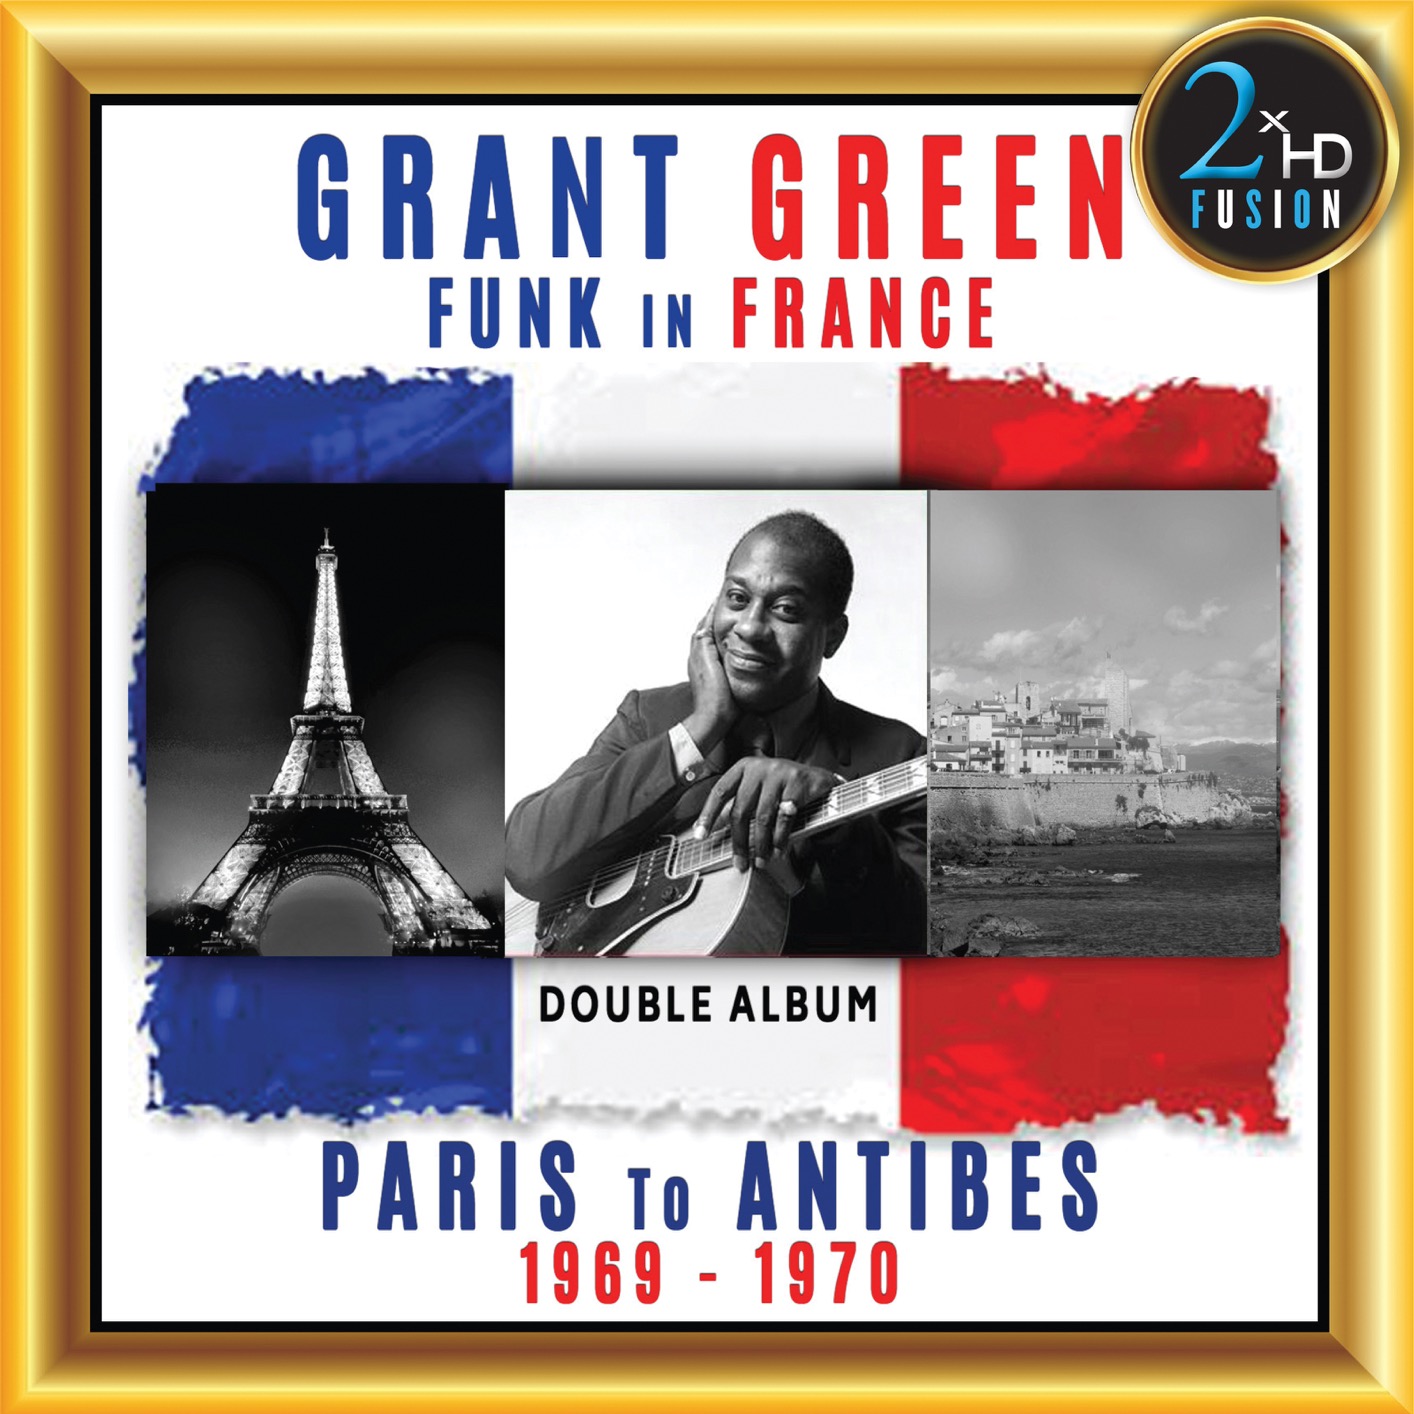 Grant Green - Green: Funk in France - Paris to Antibes (Live - Remastered) (2019) [FLAC 24bit/192kHz]